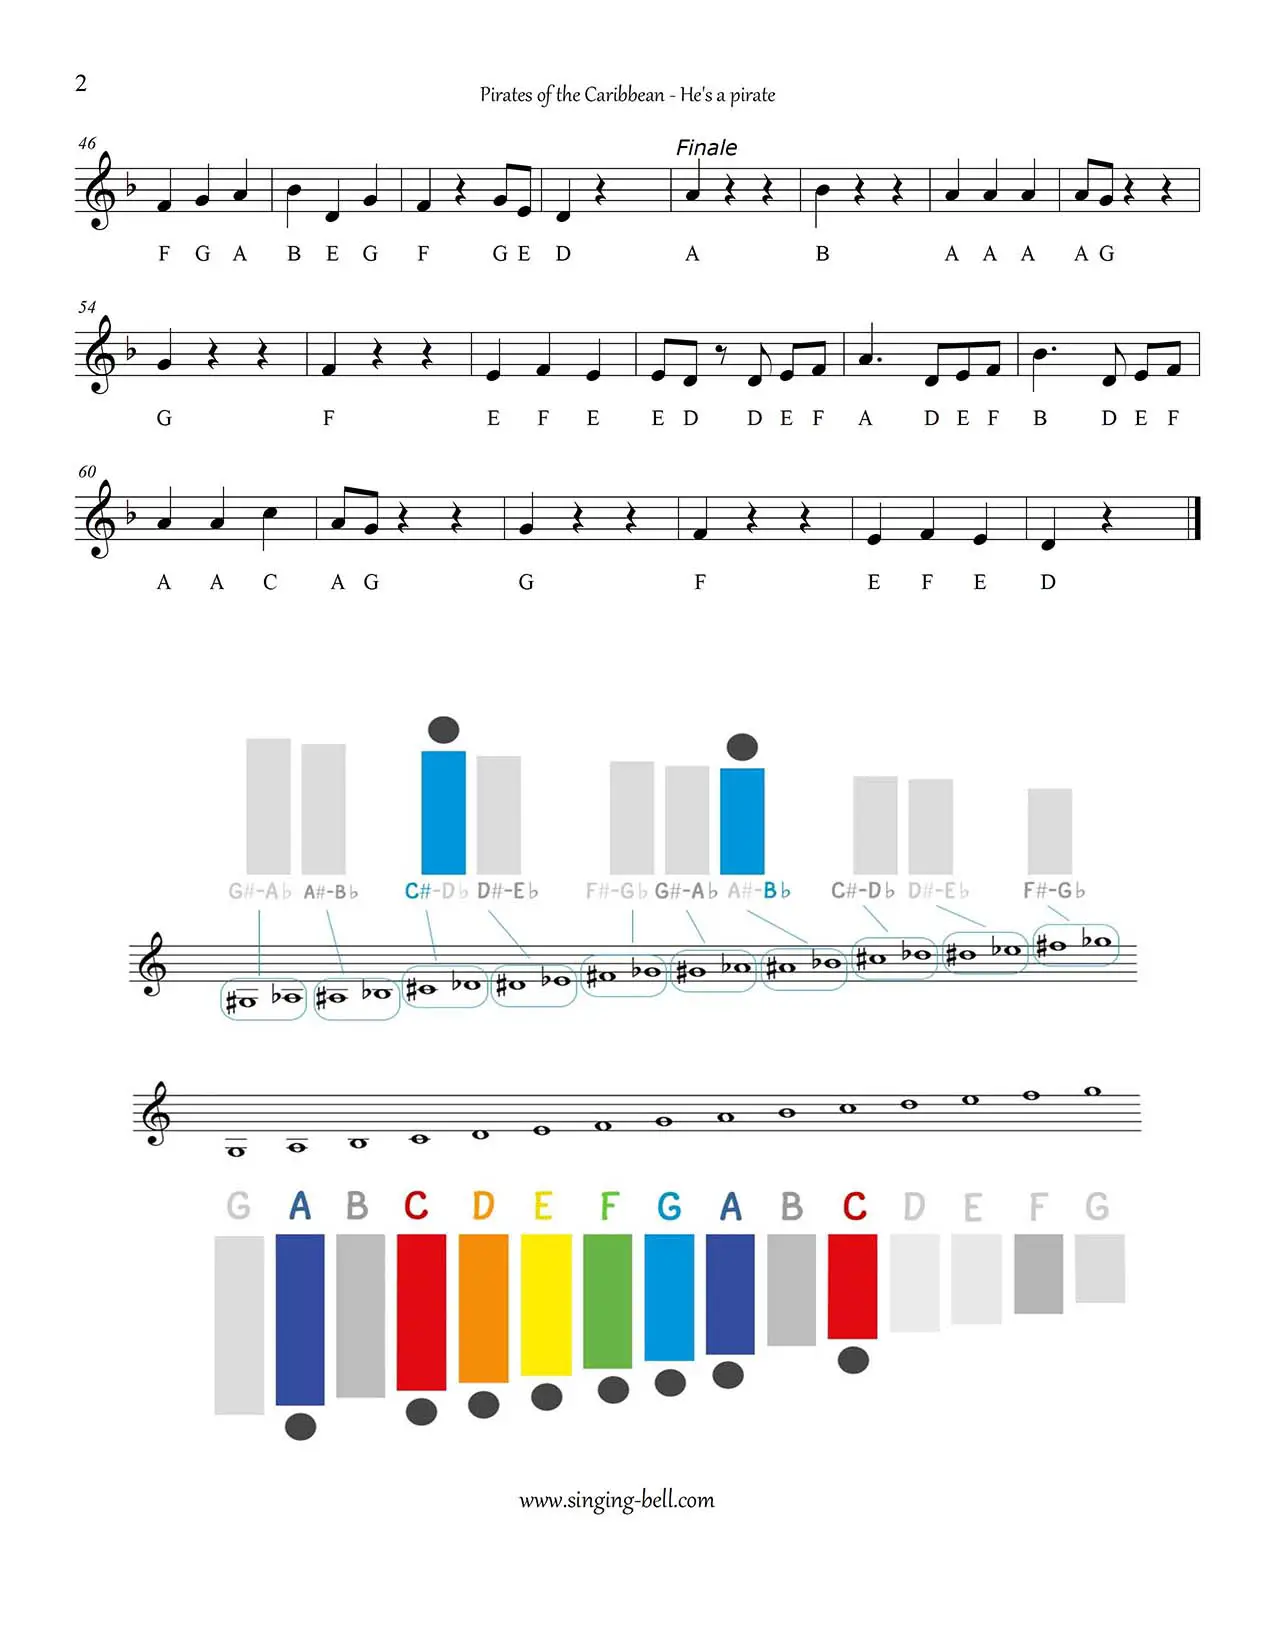 Pirates of the Caribbean free xylophone glockenspiel full sheet music p.2 notes chart pdf